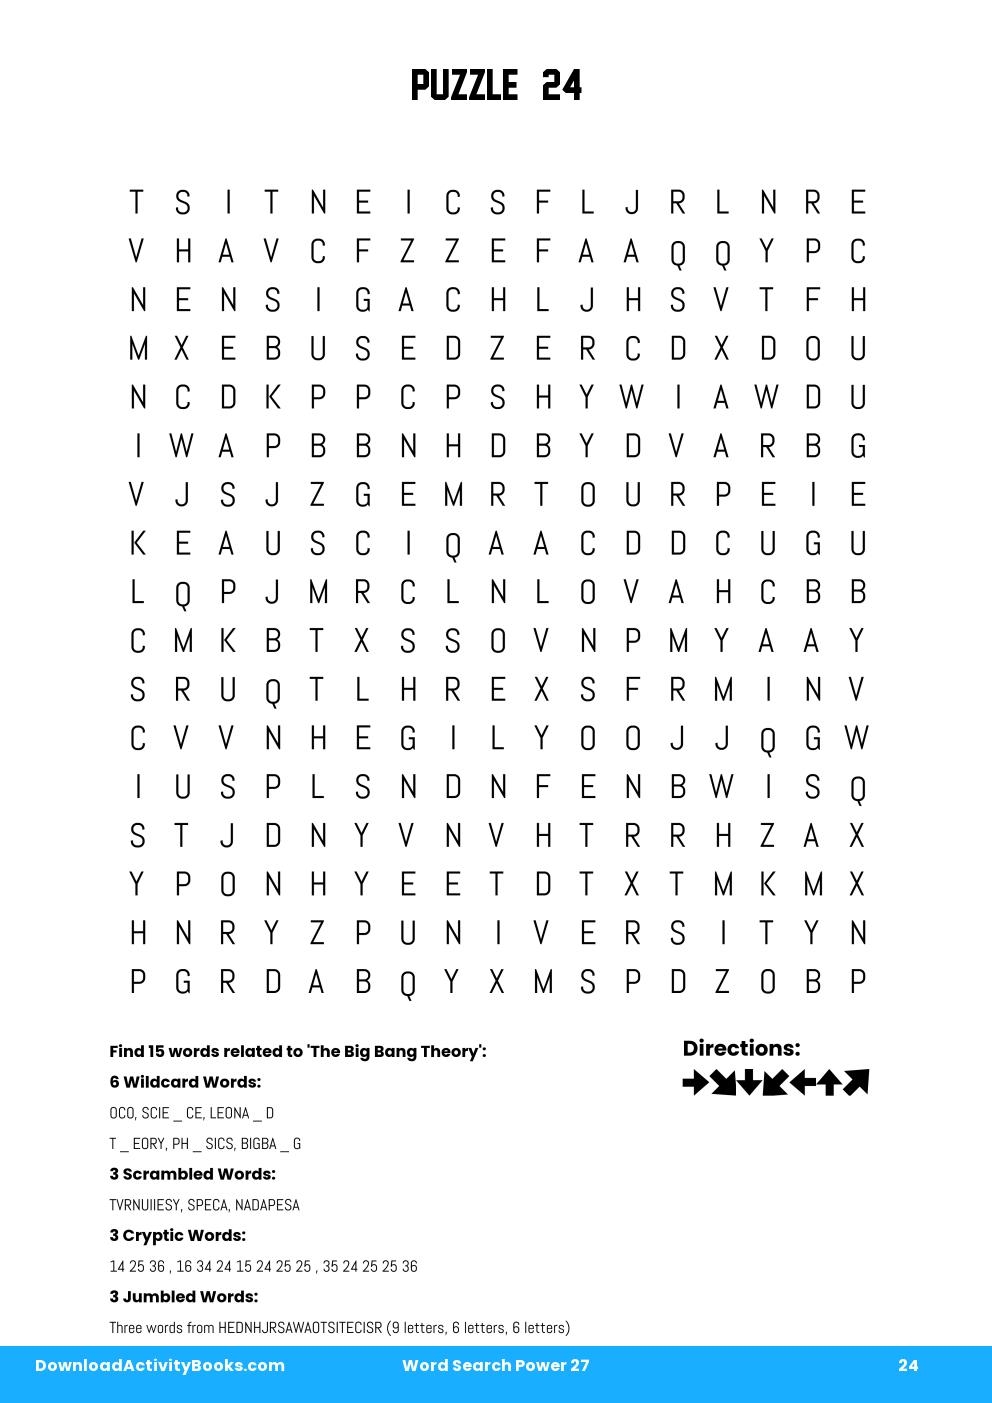 Word Search Power in Word Search Power 27